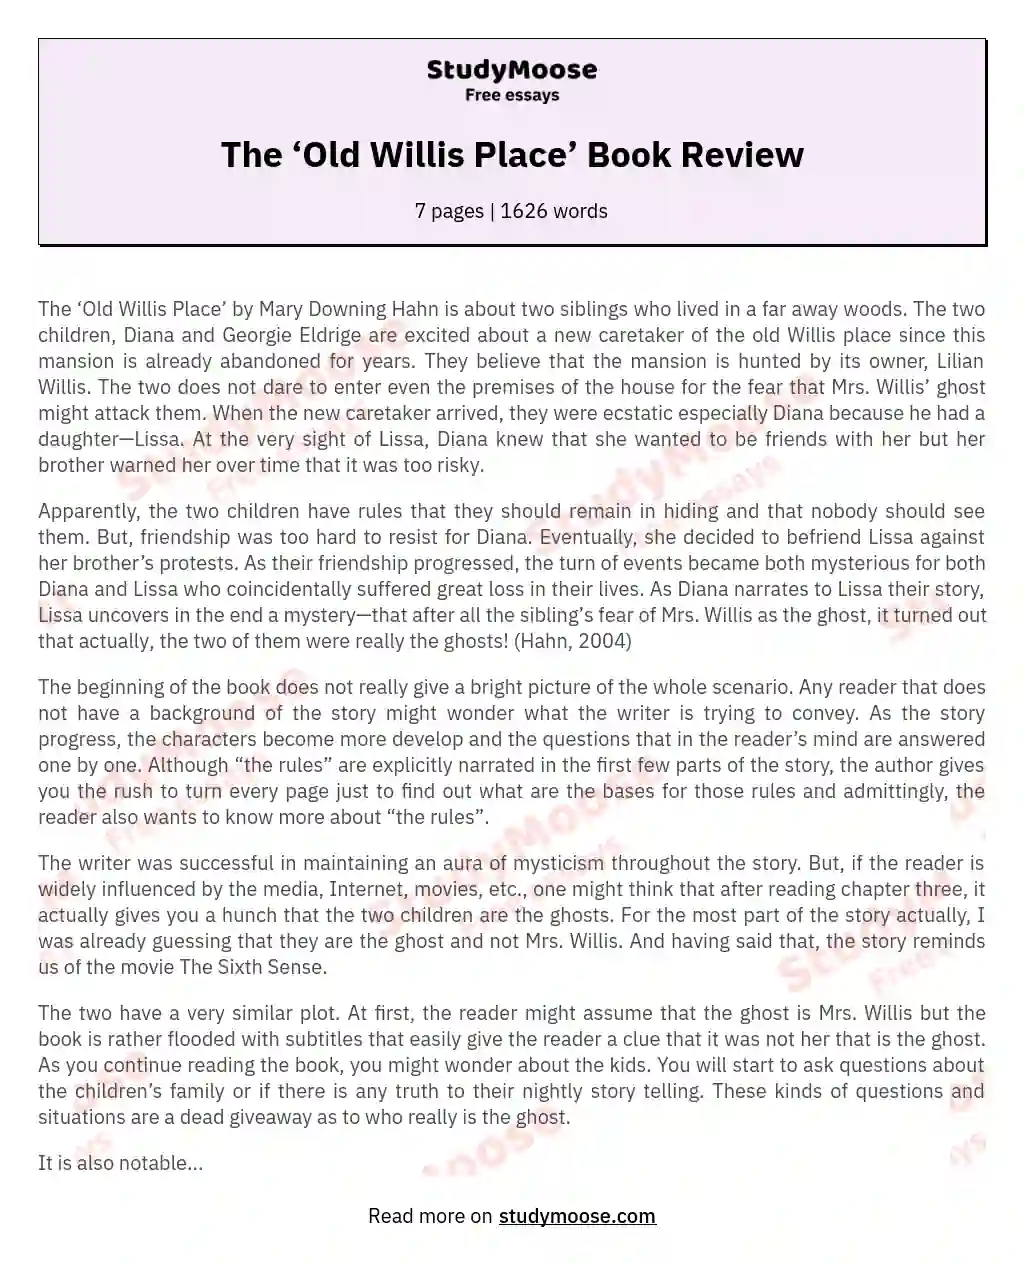 The ‘Old Willis Place’ Book Review essay